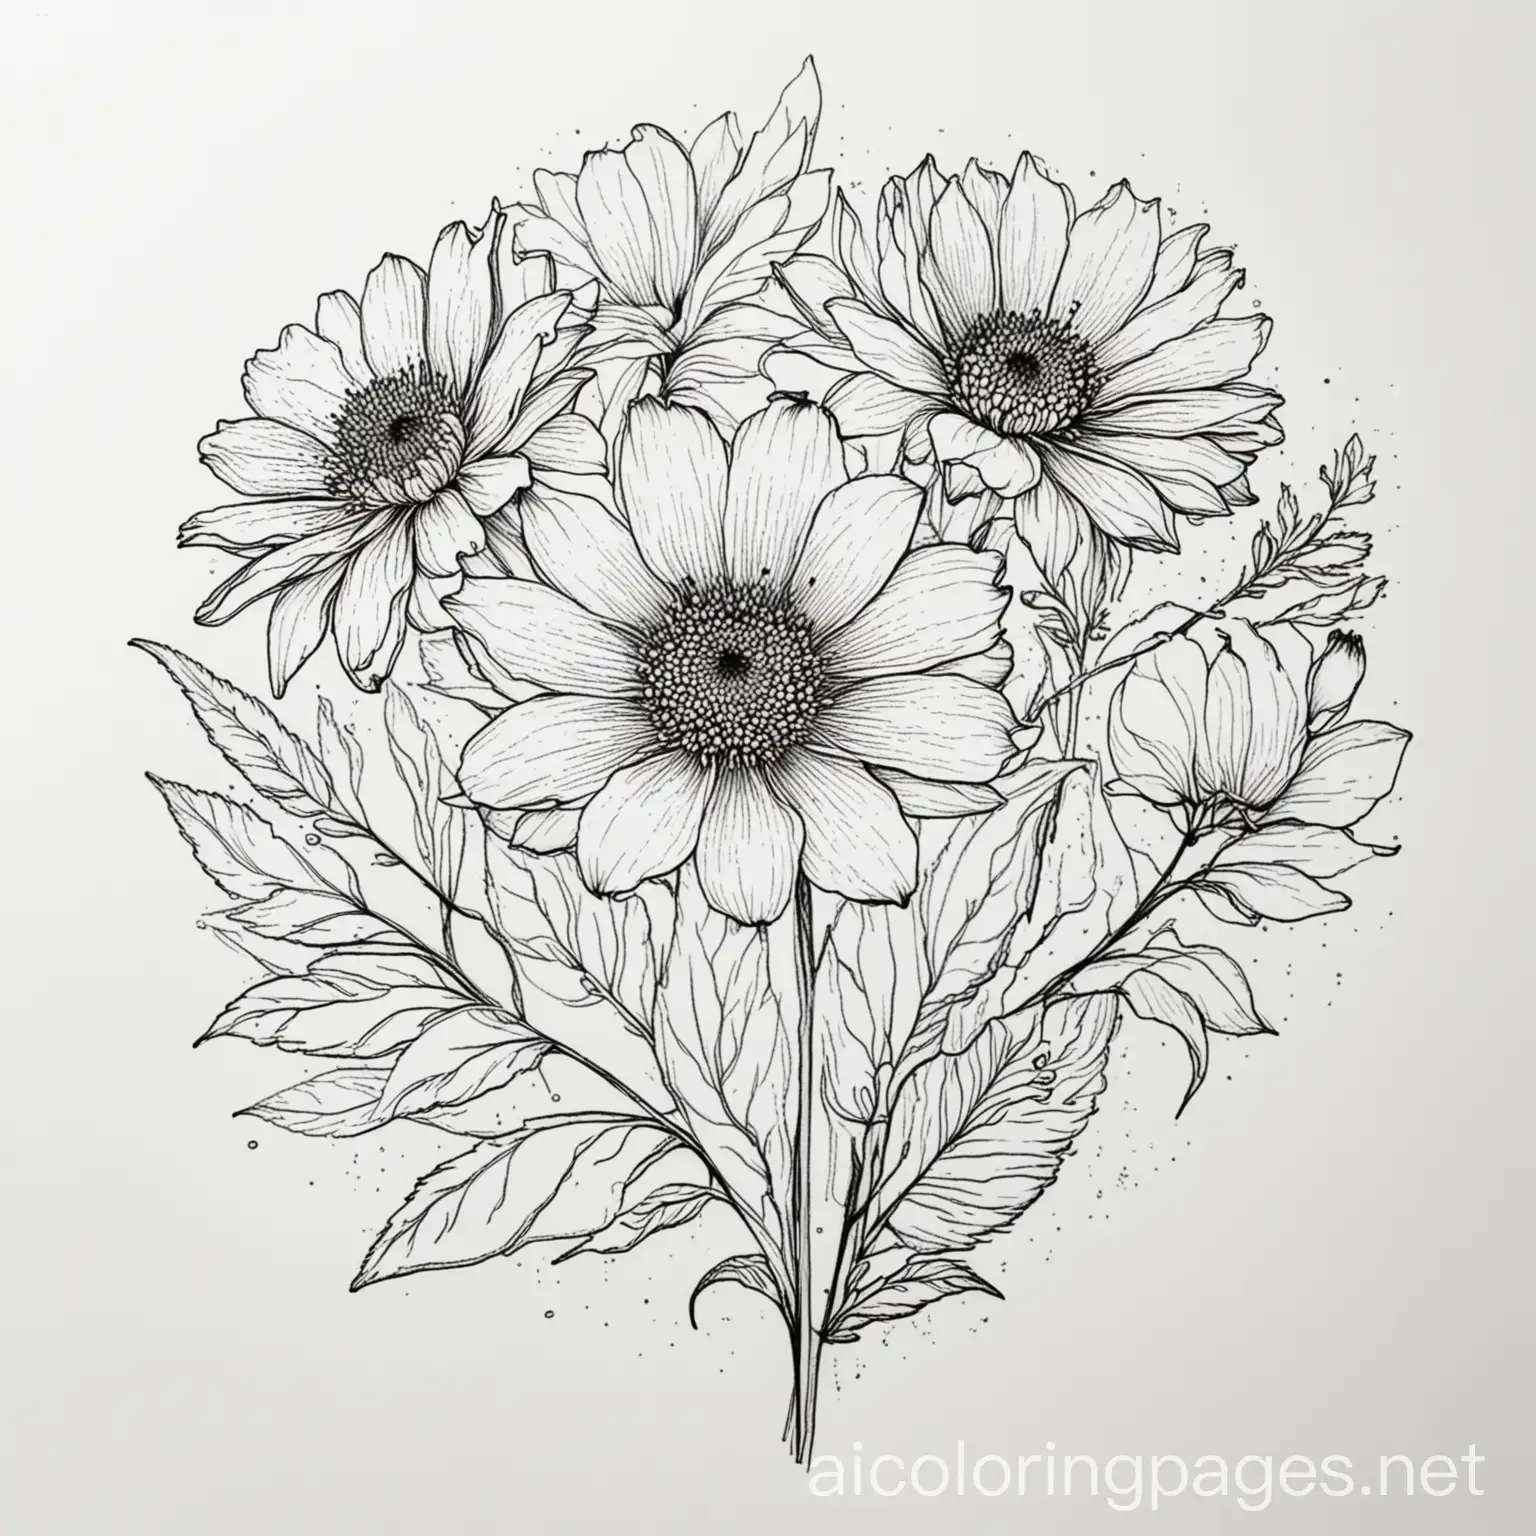 COLORING IMAGE OF FLOWERS, Coloring Page, black and white, line art, white background, Simplicity, Ample White Space. The background of the coloring page is plain white to make it easy for young children to color within the lines. The outlines of all the subjects are easy to distinguish, making it simple for kids to color without too much difficulty